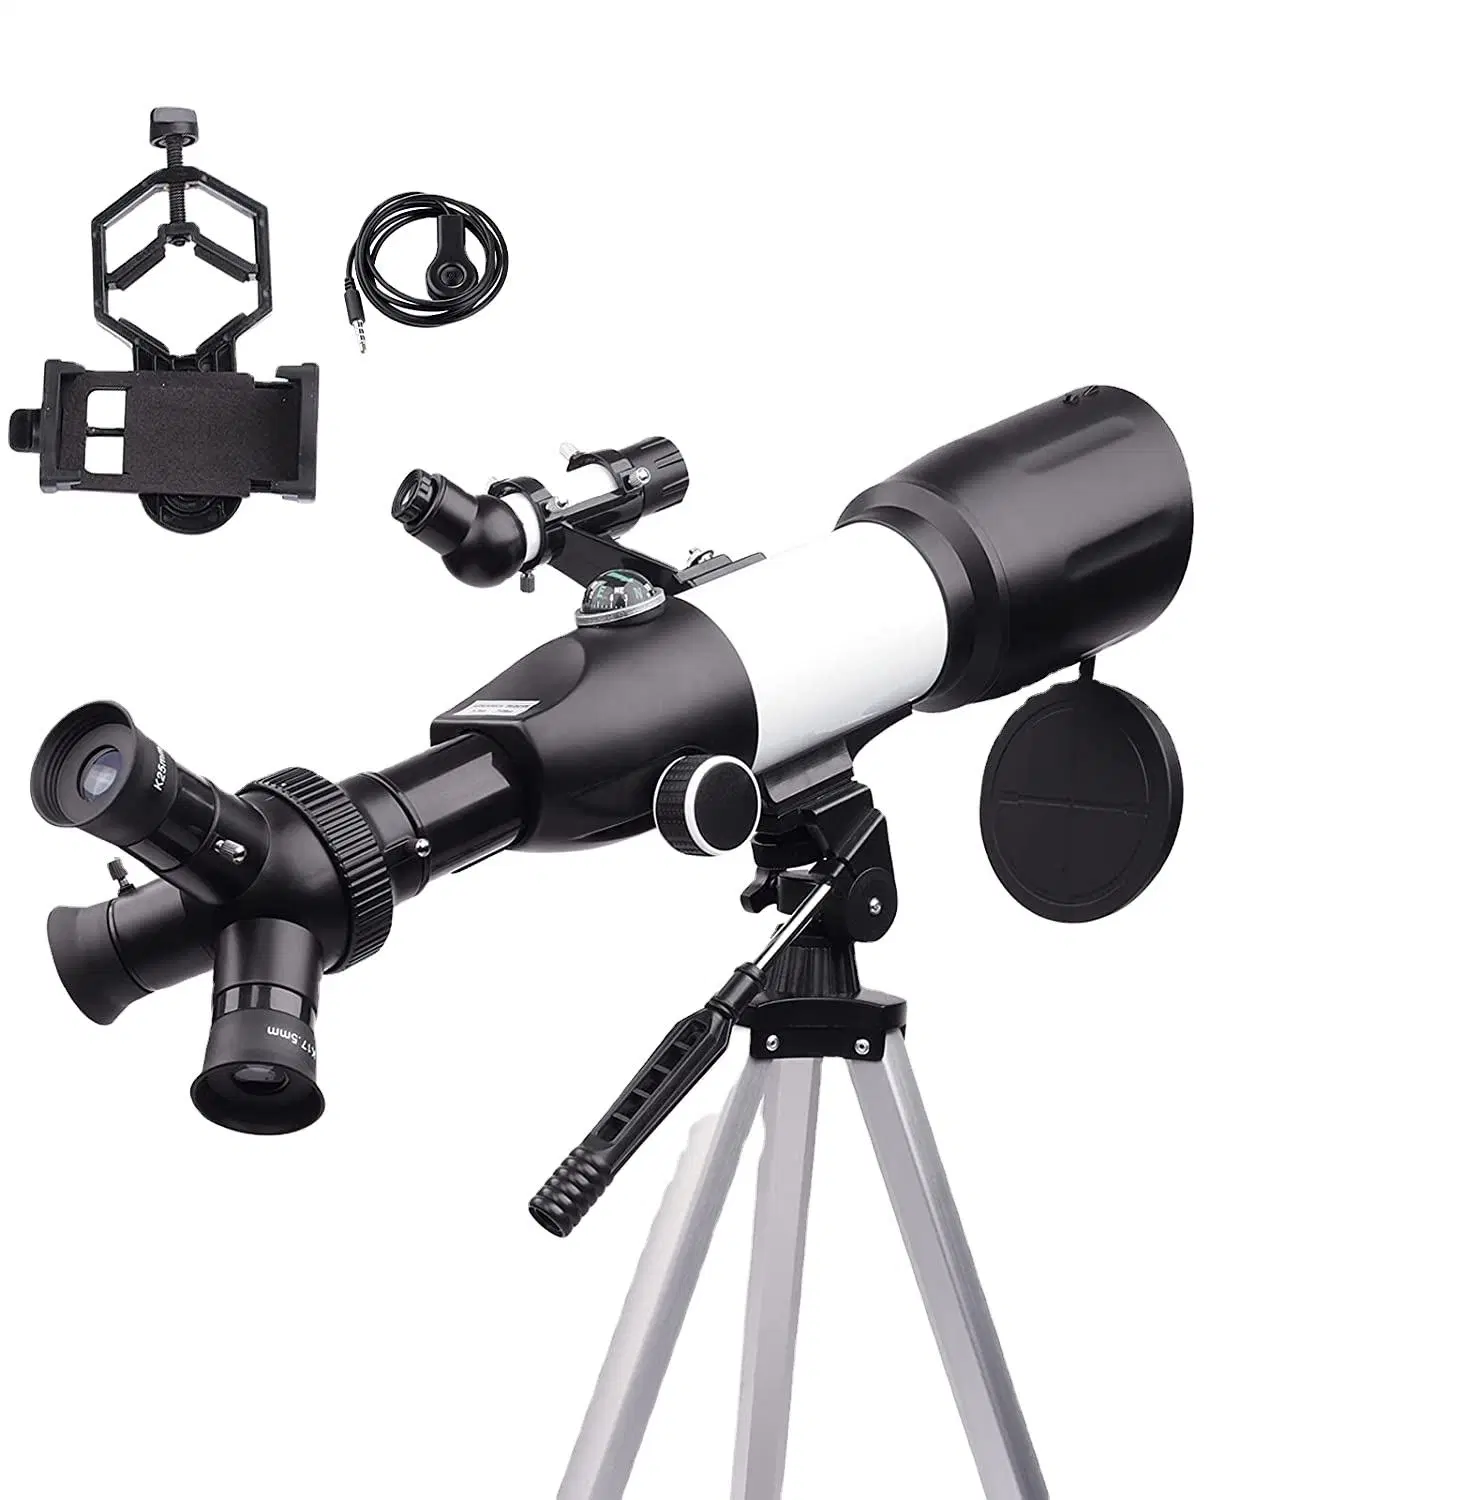 Basic Customization 3 Rotatable Eyepieces 70mm Aperture Astronomical Refraction Telescope